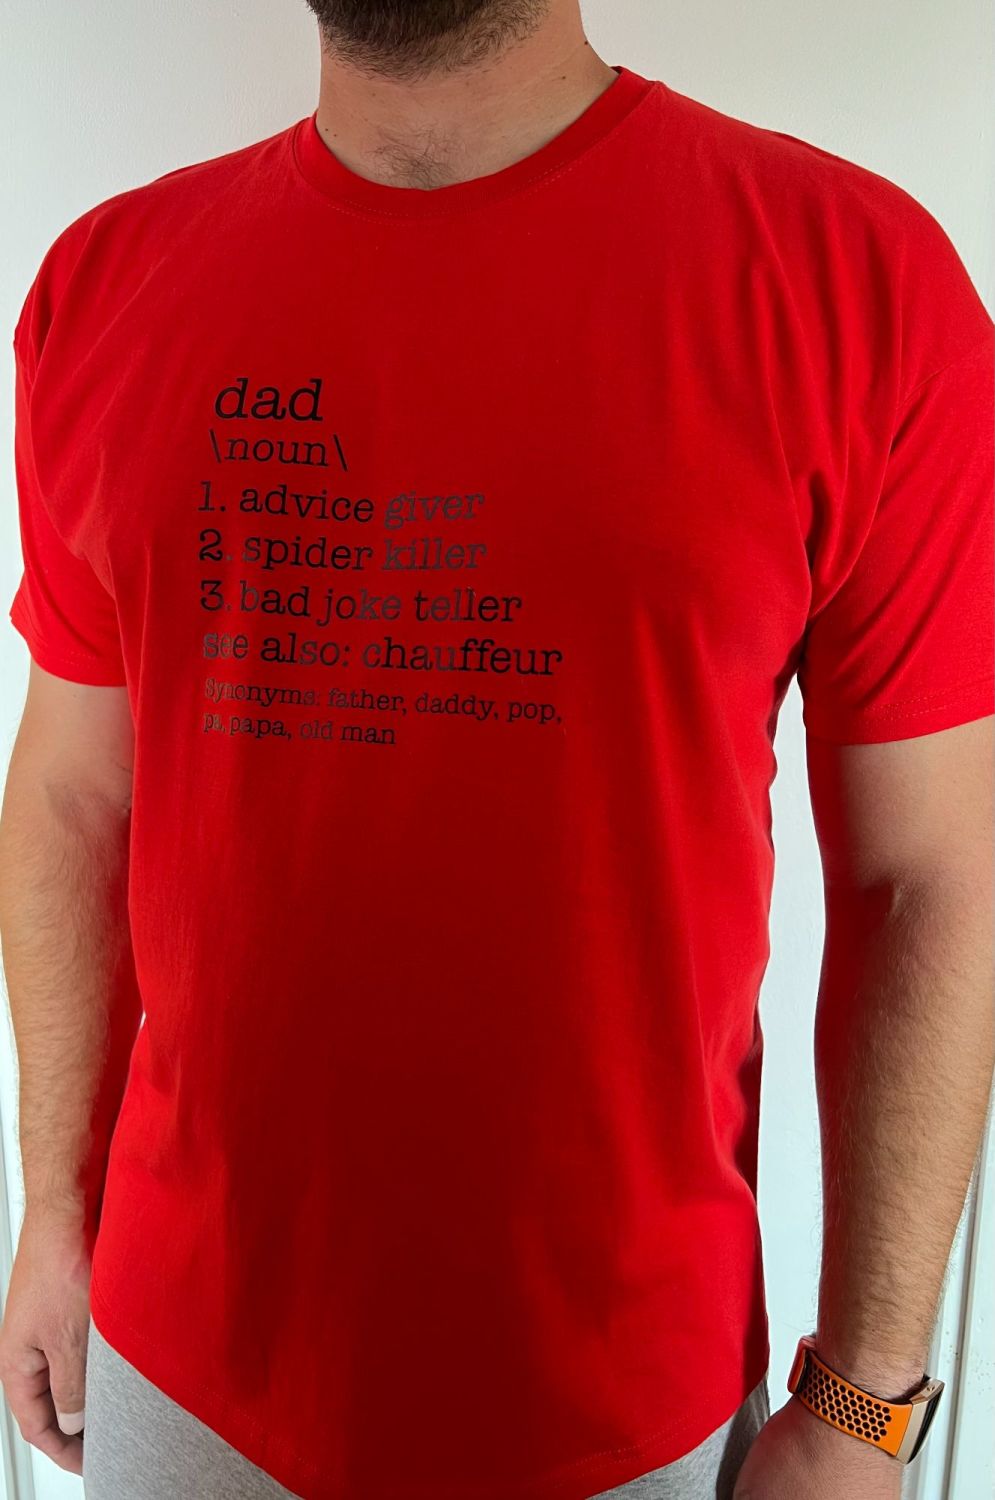 Hand Crafted Customisable Men's Top - Dad Noun T Shirt - Father's Day / Gif